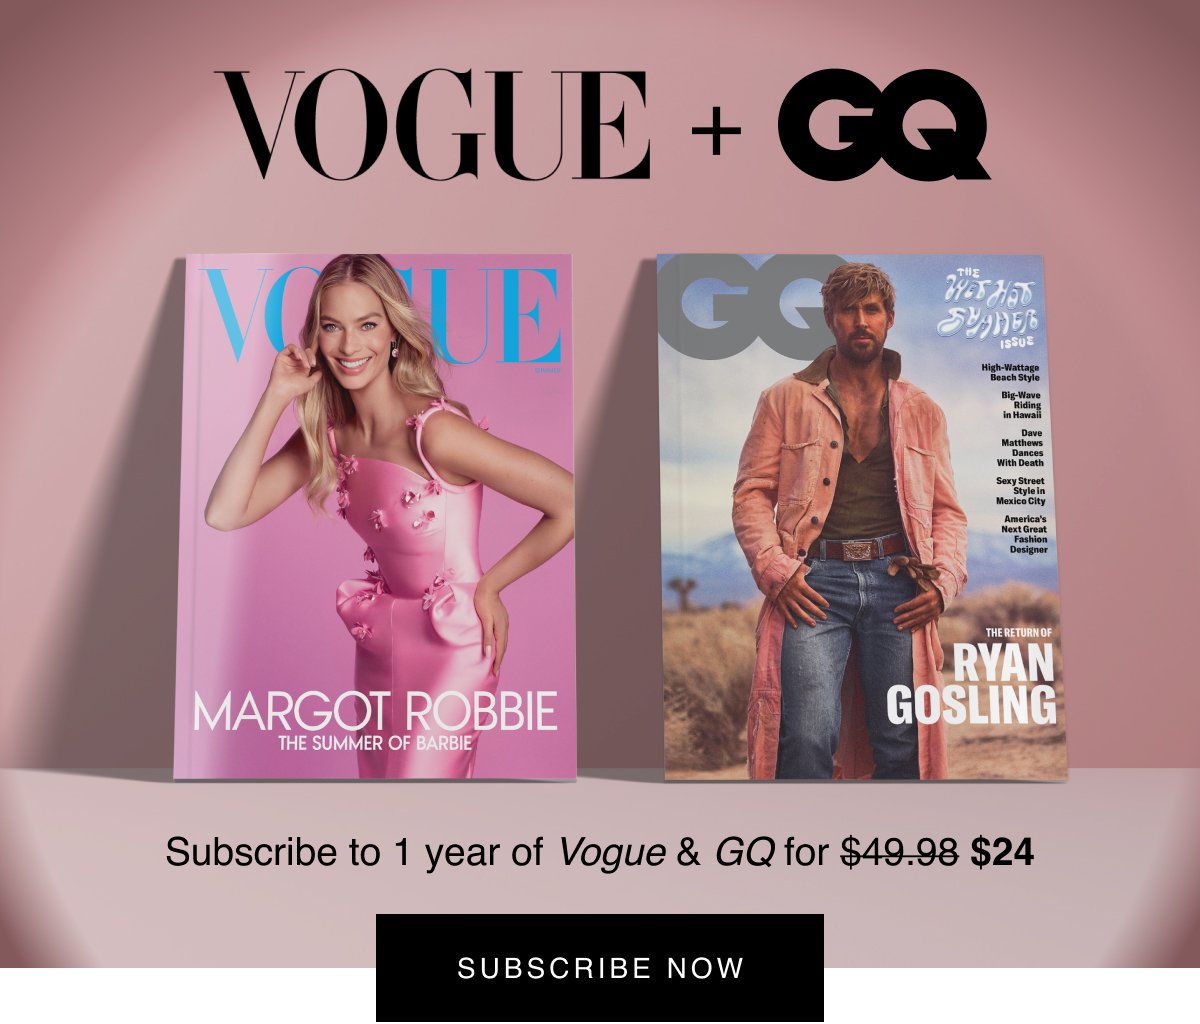 VOGUE: The hottest issues of the summer